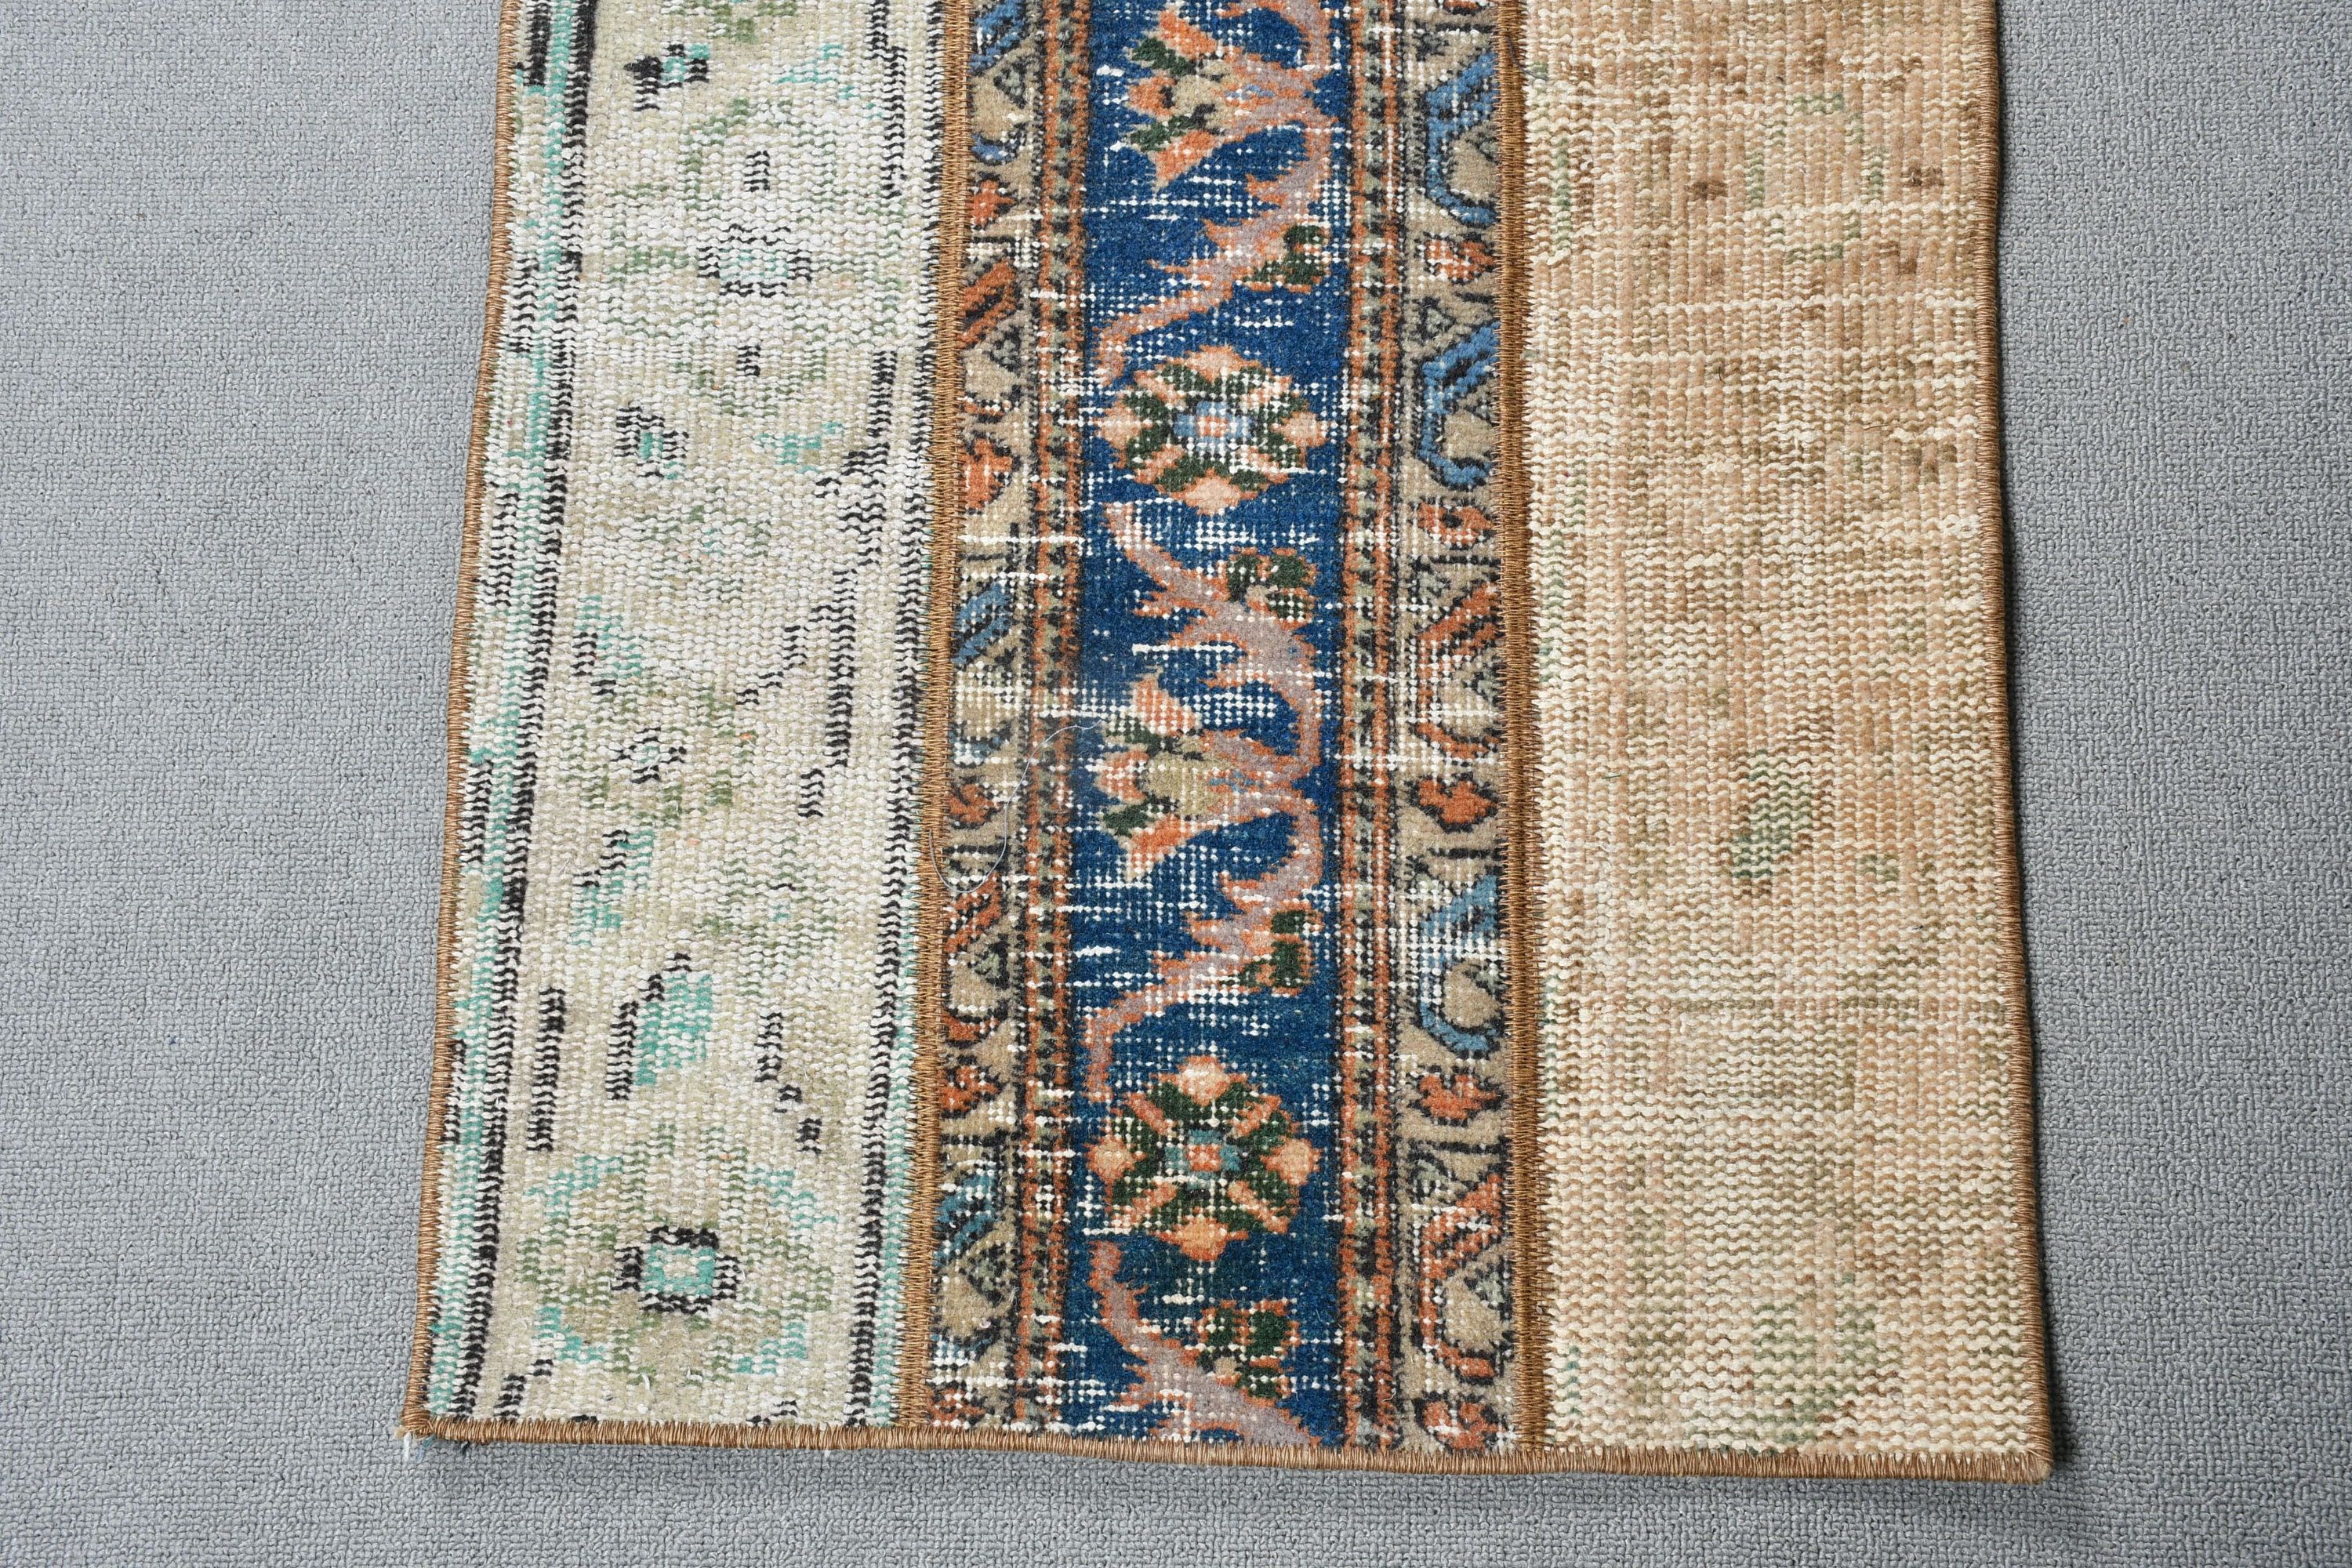 Rugs for Entry, 1.8x3.6 ft Small Rug, Authentic Rugs, Vintage Rugs, Beige Kitchen Rugs, Anatolian Rug, Bedroom Rug, Floor Rug, Turkish Rug